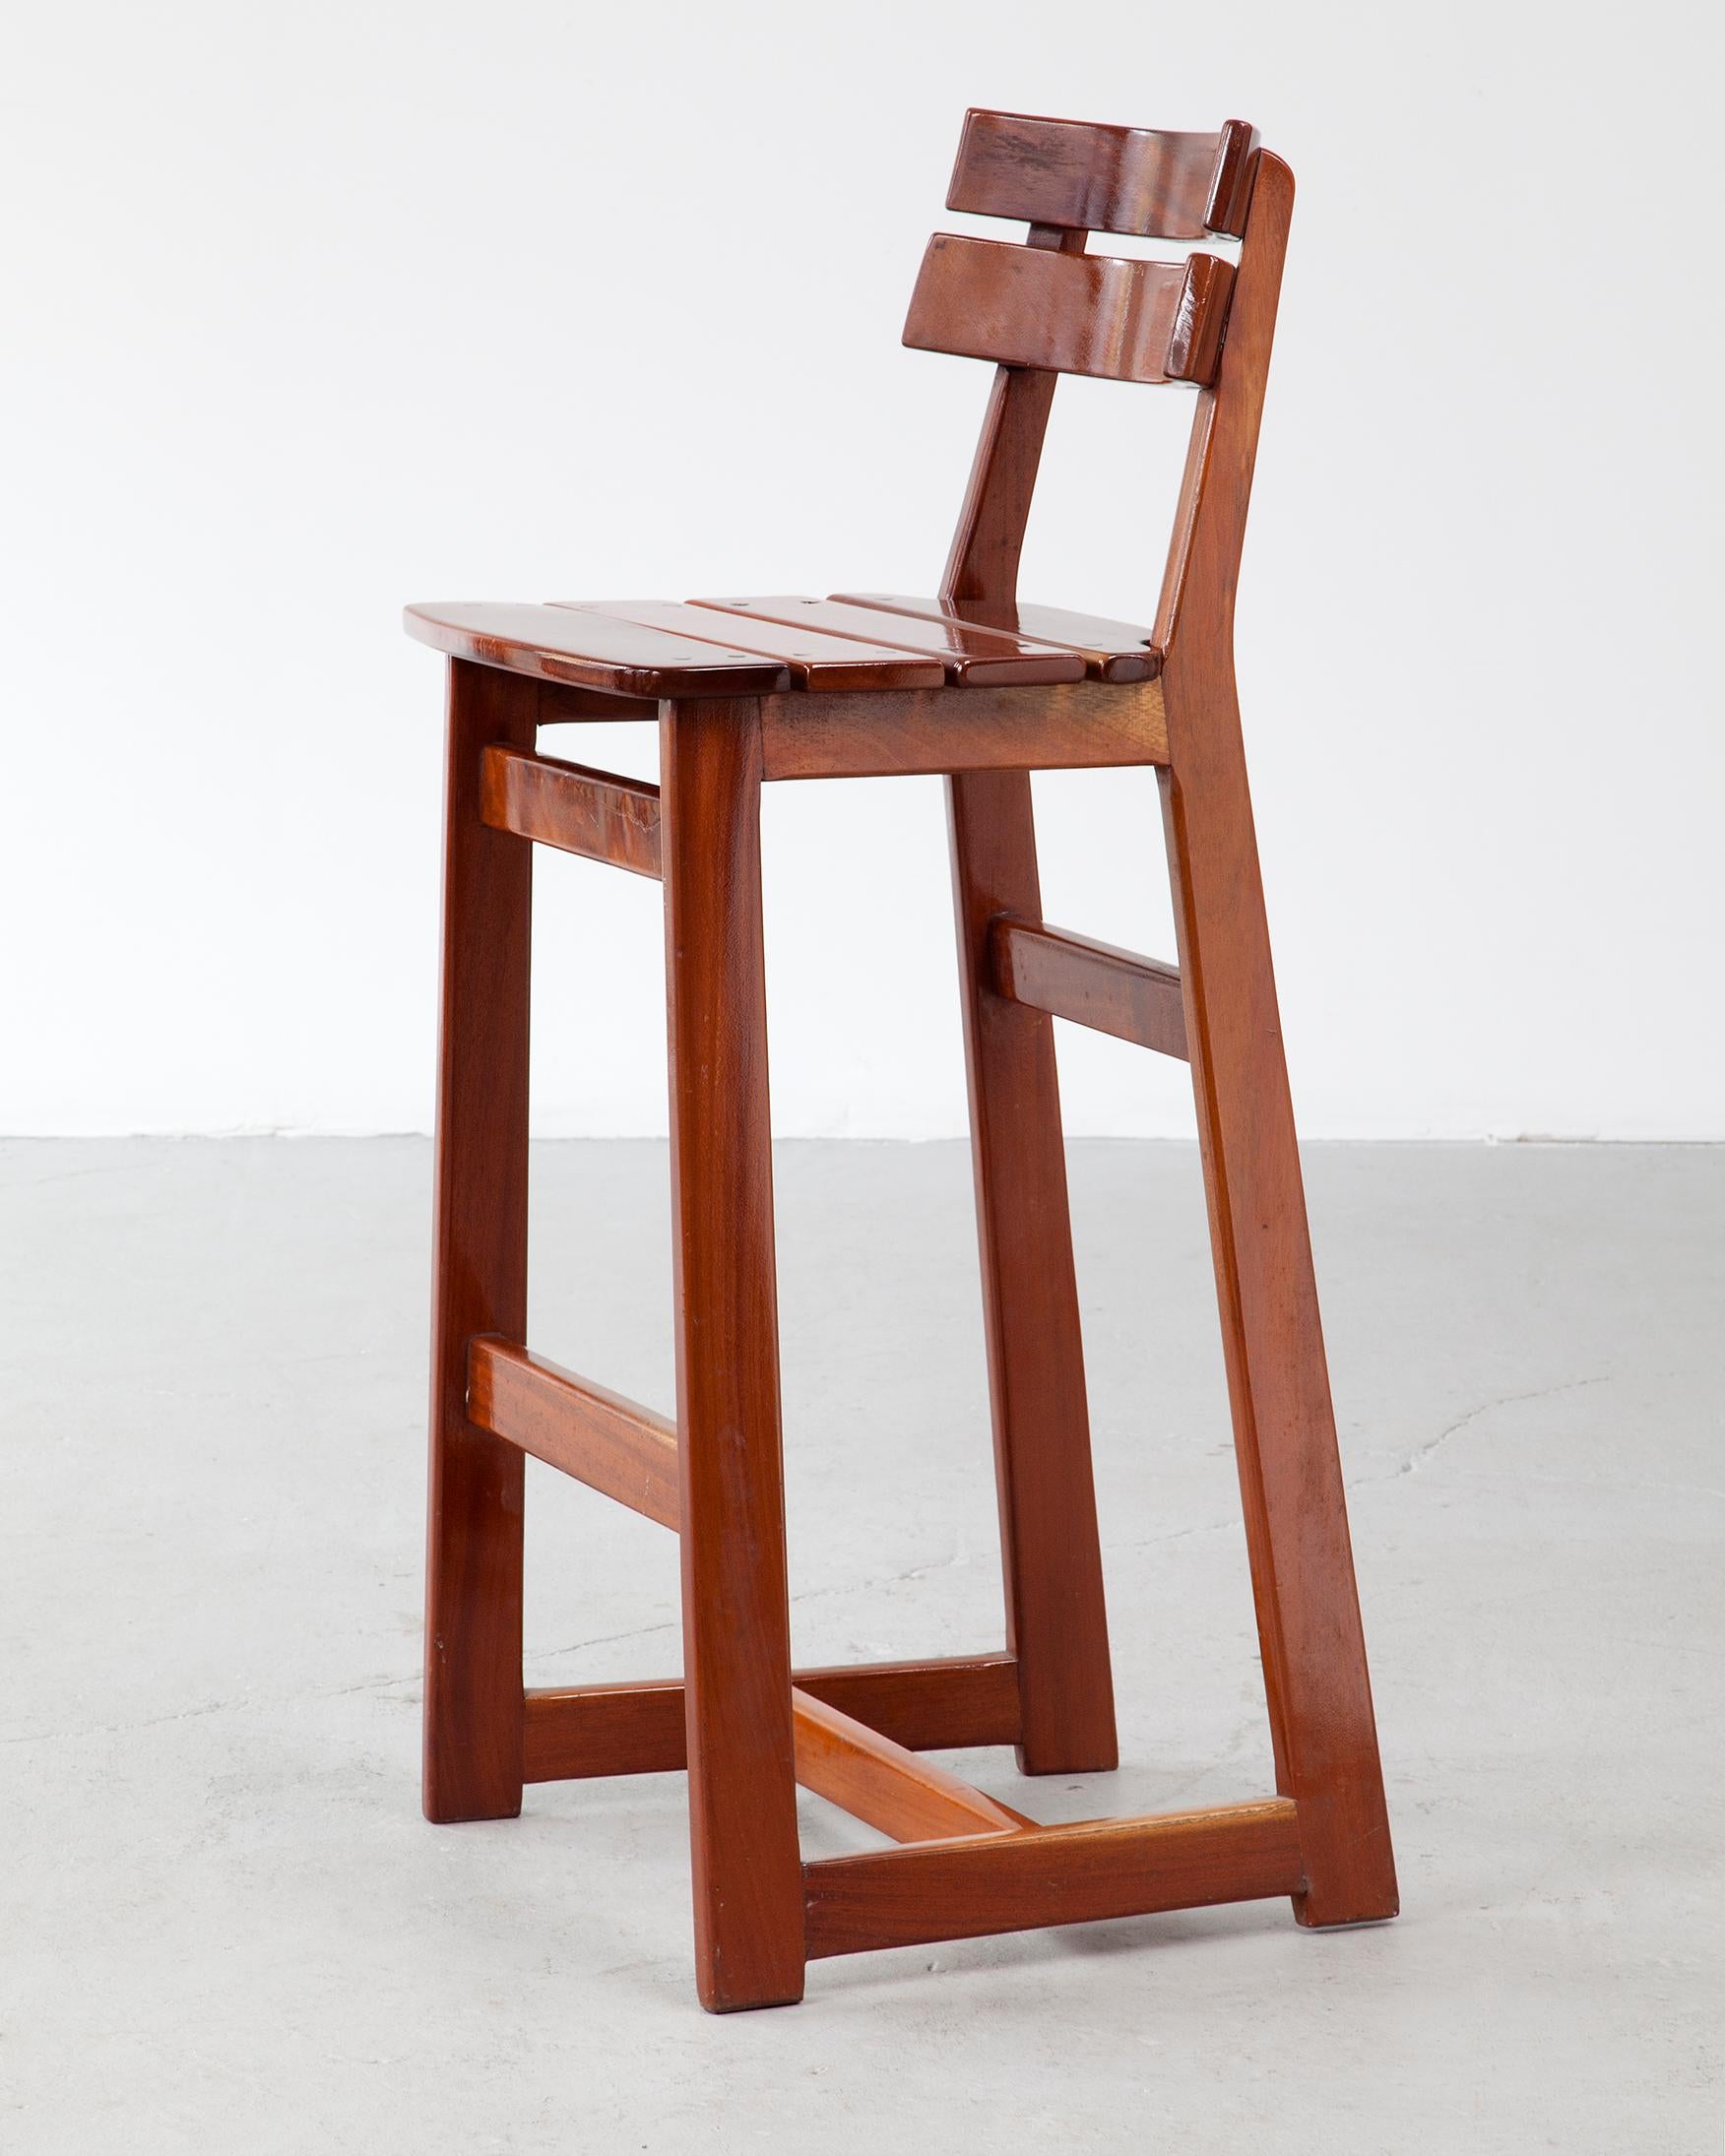 Pair of Barstools in Brazilian Mahogany by Sérgio Rodrigues In Excellent Condition For Sale In New York, NY